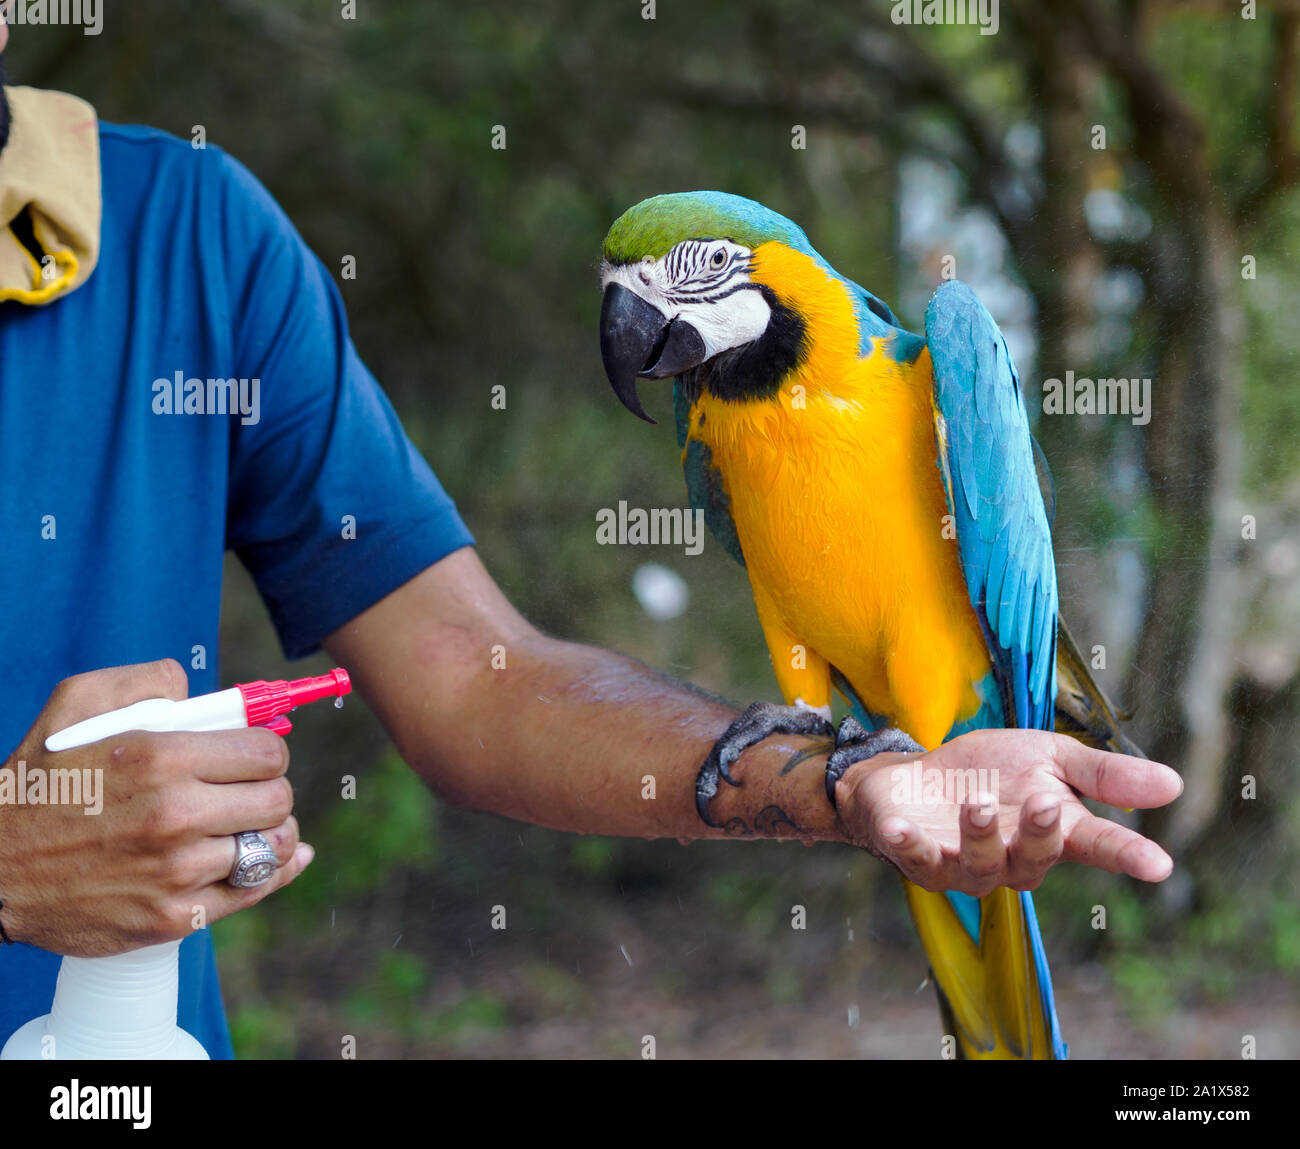 Blue and yellow Macaw, Ara ararauna, is misted with a spray bottle at the South Texas Botanical Gardens & Nature Center. Corpus Christi, Texas USA Stock Photo